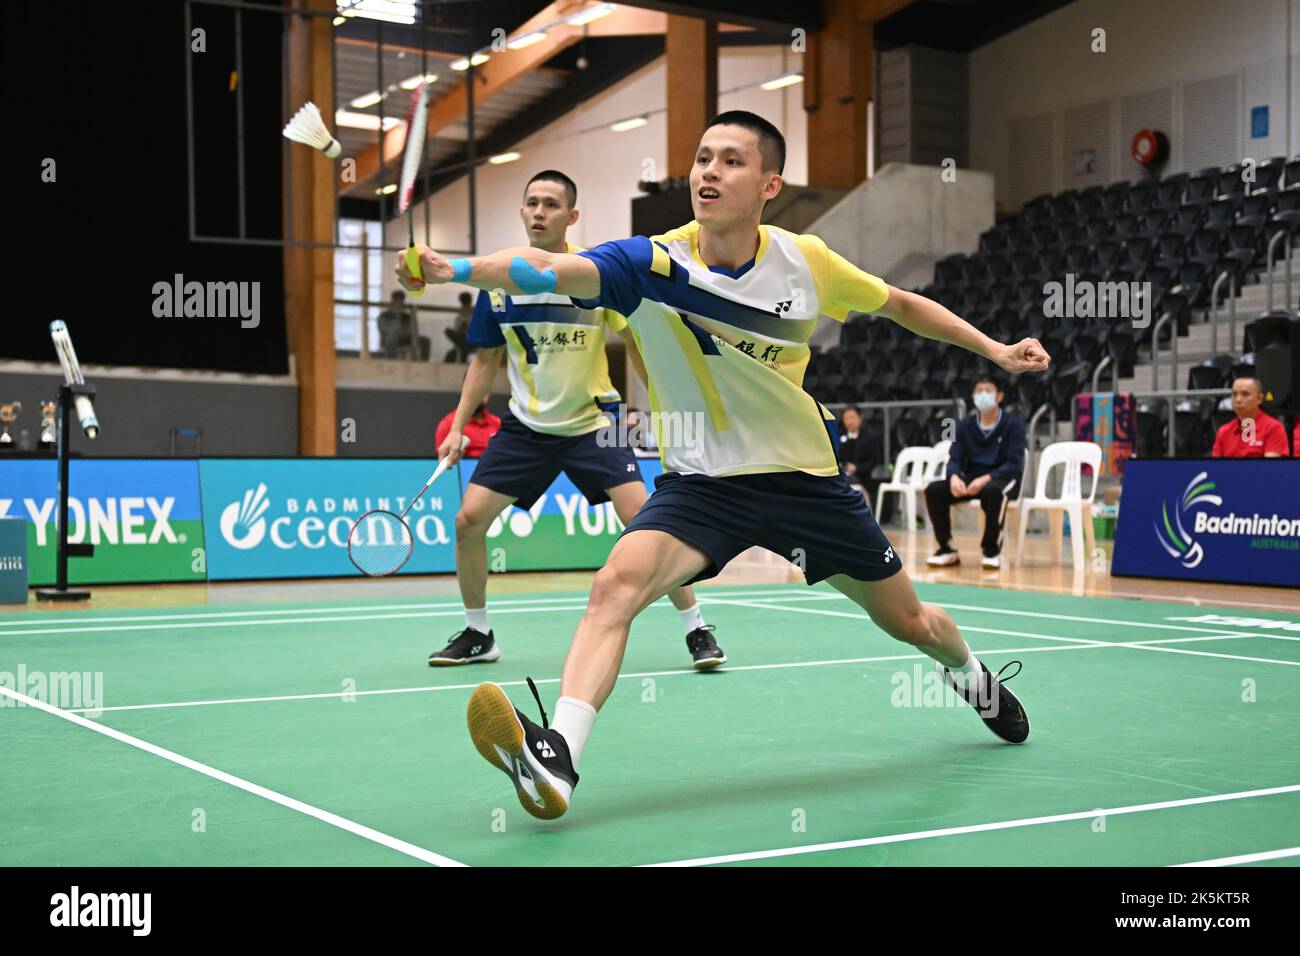 Sydney, Australia. 09th Oct, 2022. Lee Fang-Jen (L) and Lee Fang-Chih (R) of Chinese Taipei seen in action during the YONEX Sydney International 2022 Men's Double finals match against Nyl Yakura and adam xingyu dong (Canada). Lee Fang-Jen and Lee Fang-Chih won the match 21-12, 16-21, 21-16. Credit: SOPA Images Limited/Alamy Live News Stock Photo